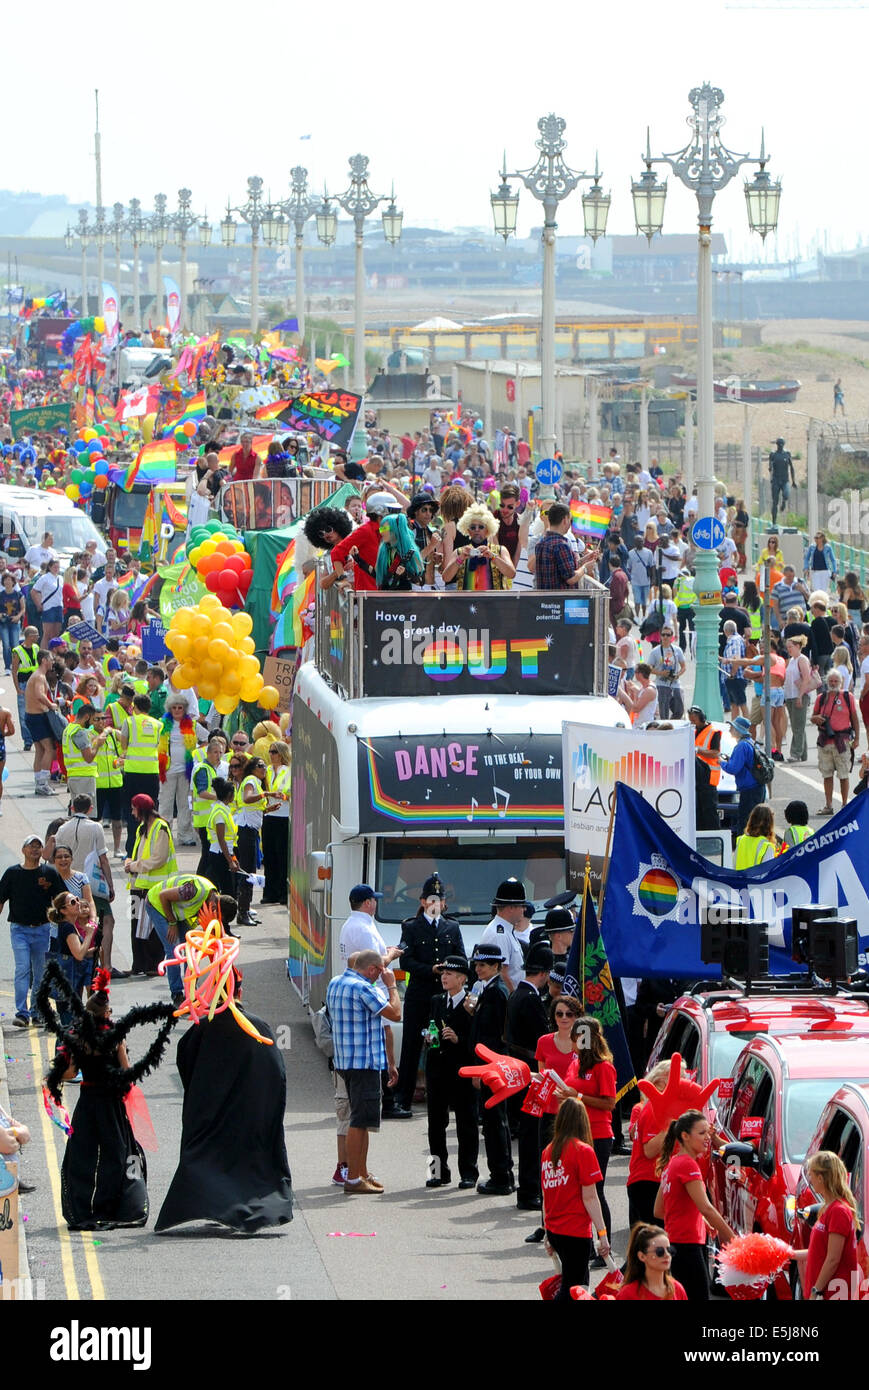 Brighton, Sussex, UK. 2nd Aug, 2014. The procession leaves the seafront as thousands of people take part in the annual Brighton Pride Parade today  Credit:  Simon Dack/Alamy Live News Stock Photo